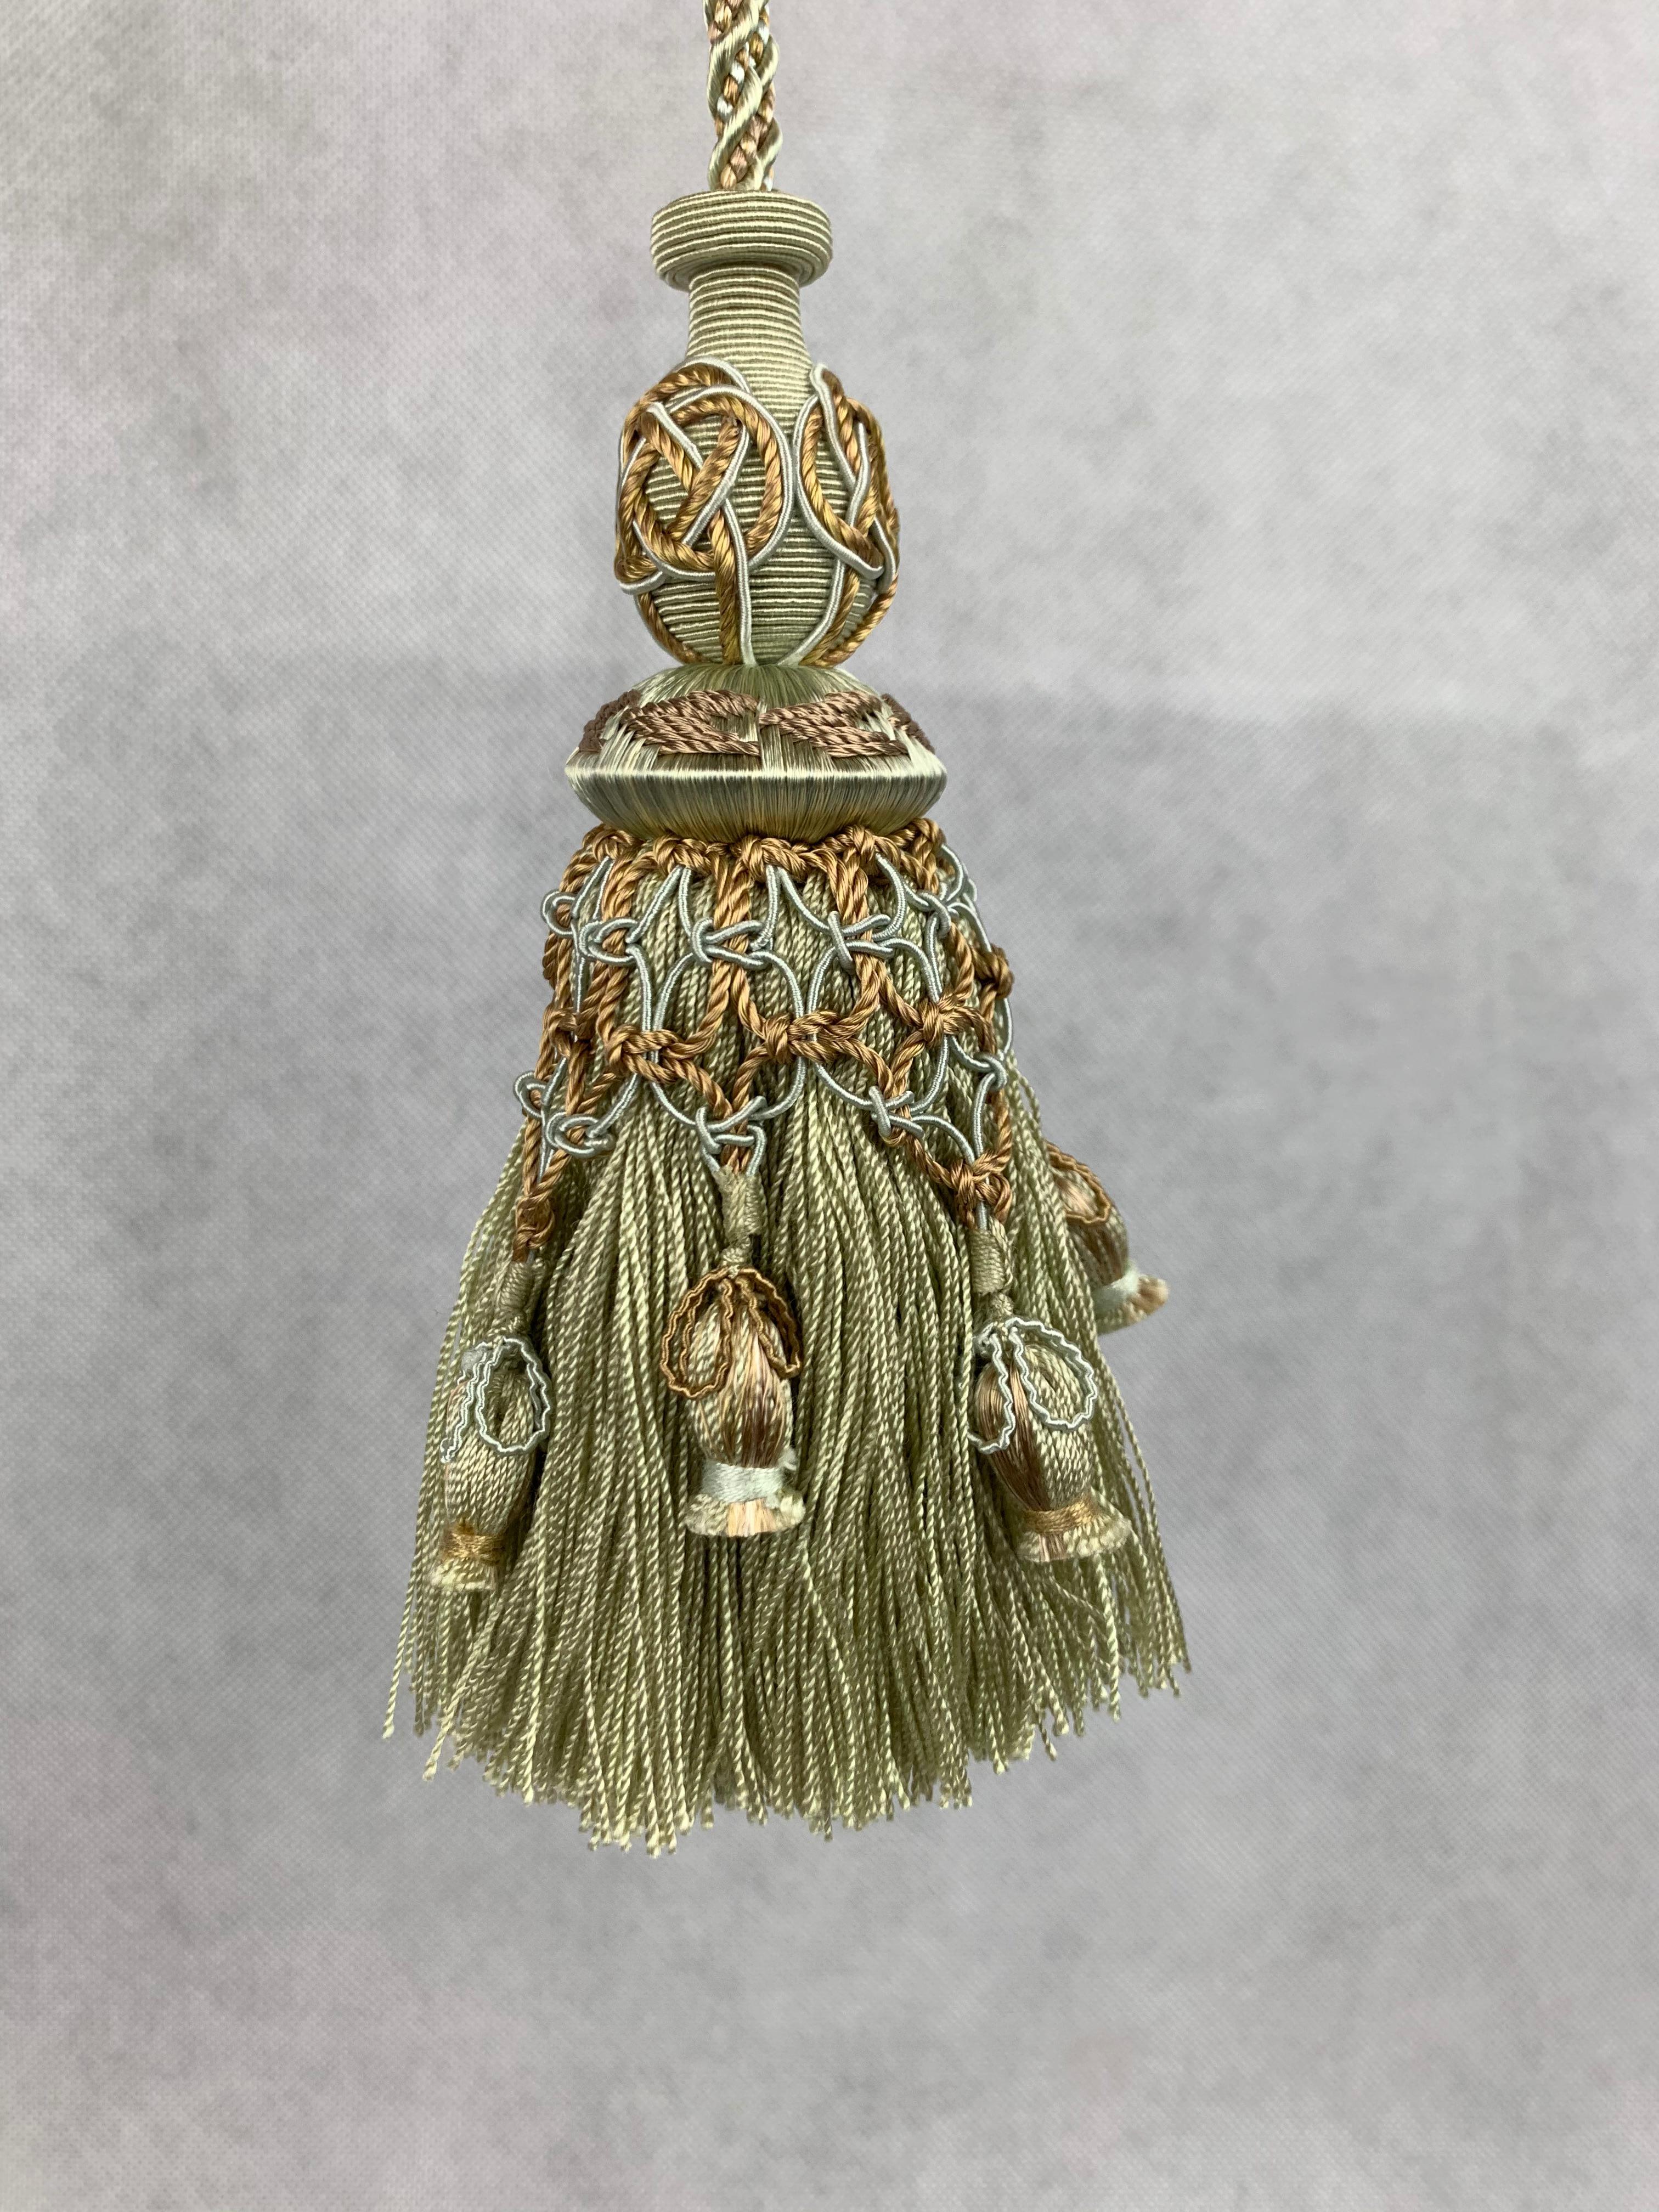  Houlés of Paris passementerie gland cle (key tassel). Nobody makes tassels like Houles.  This never used tassel still is rich in color. Perfect to hang on the key of a piece of furniture. If you don't have a key hang it from a nob or handle. It